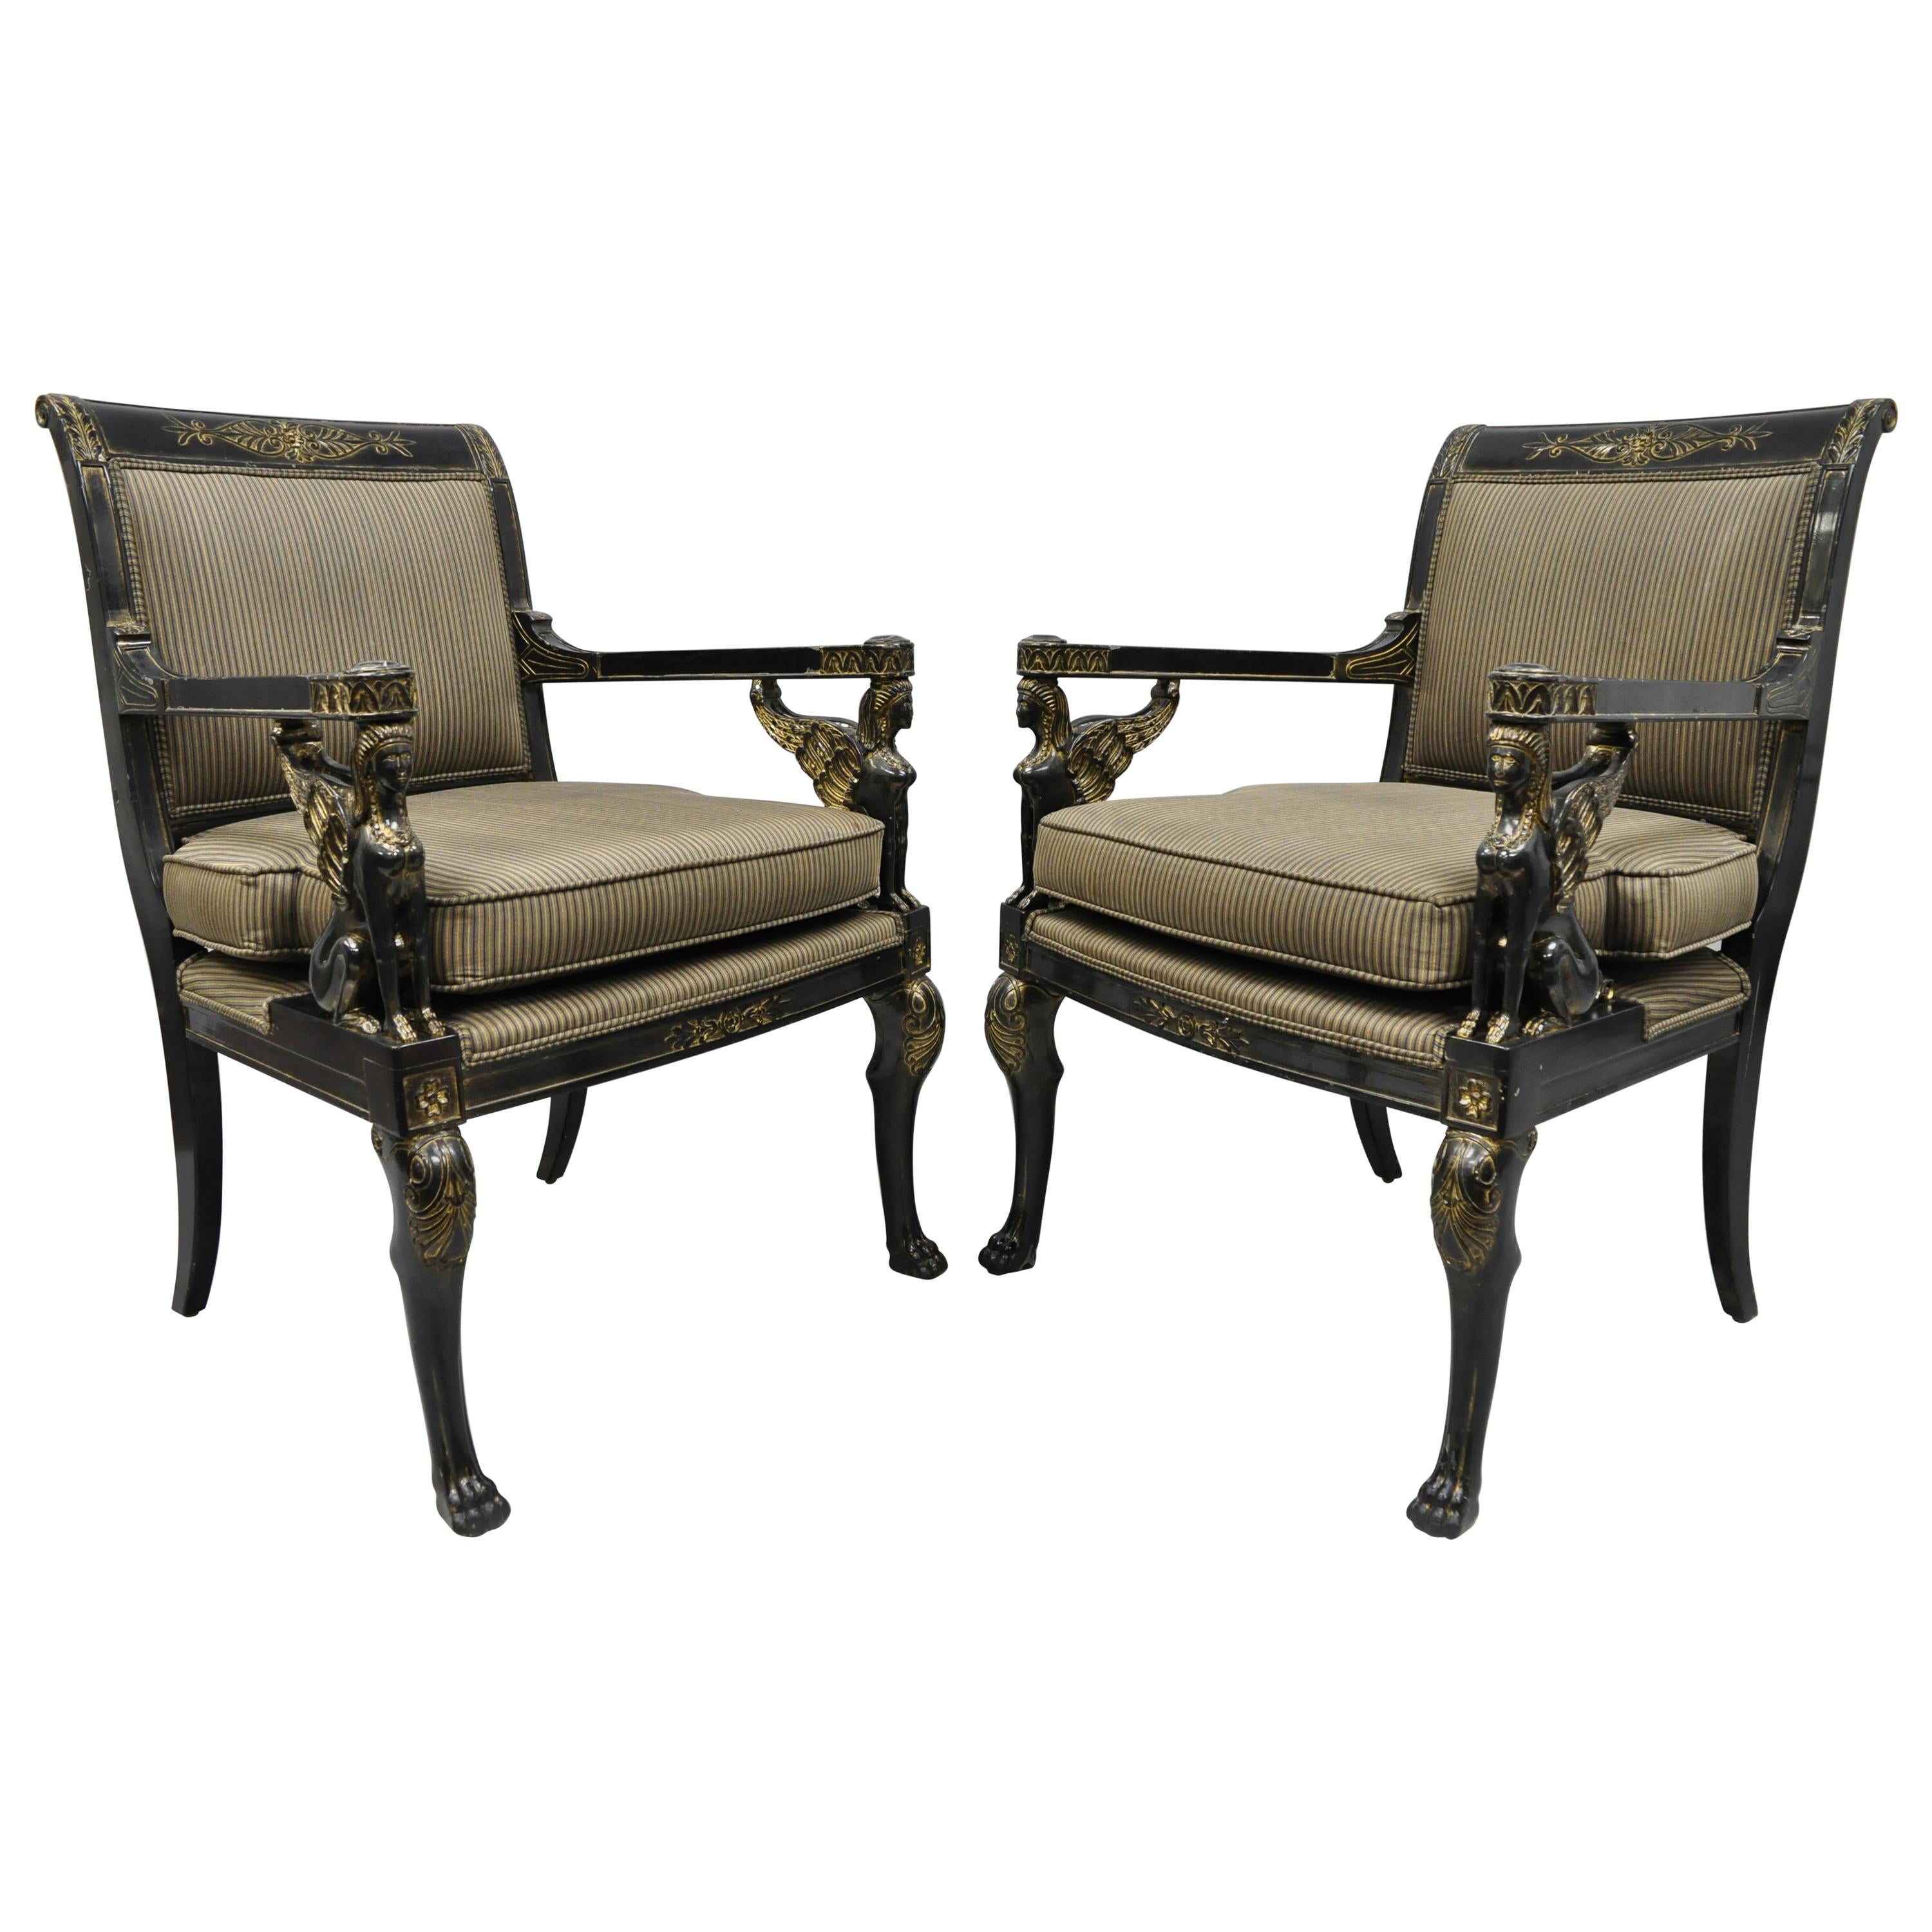 Pair of French Empire Regency Black Lacquer Chairs with Sphinx Figures, Lambert